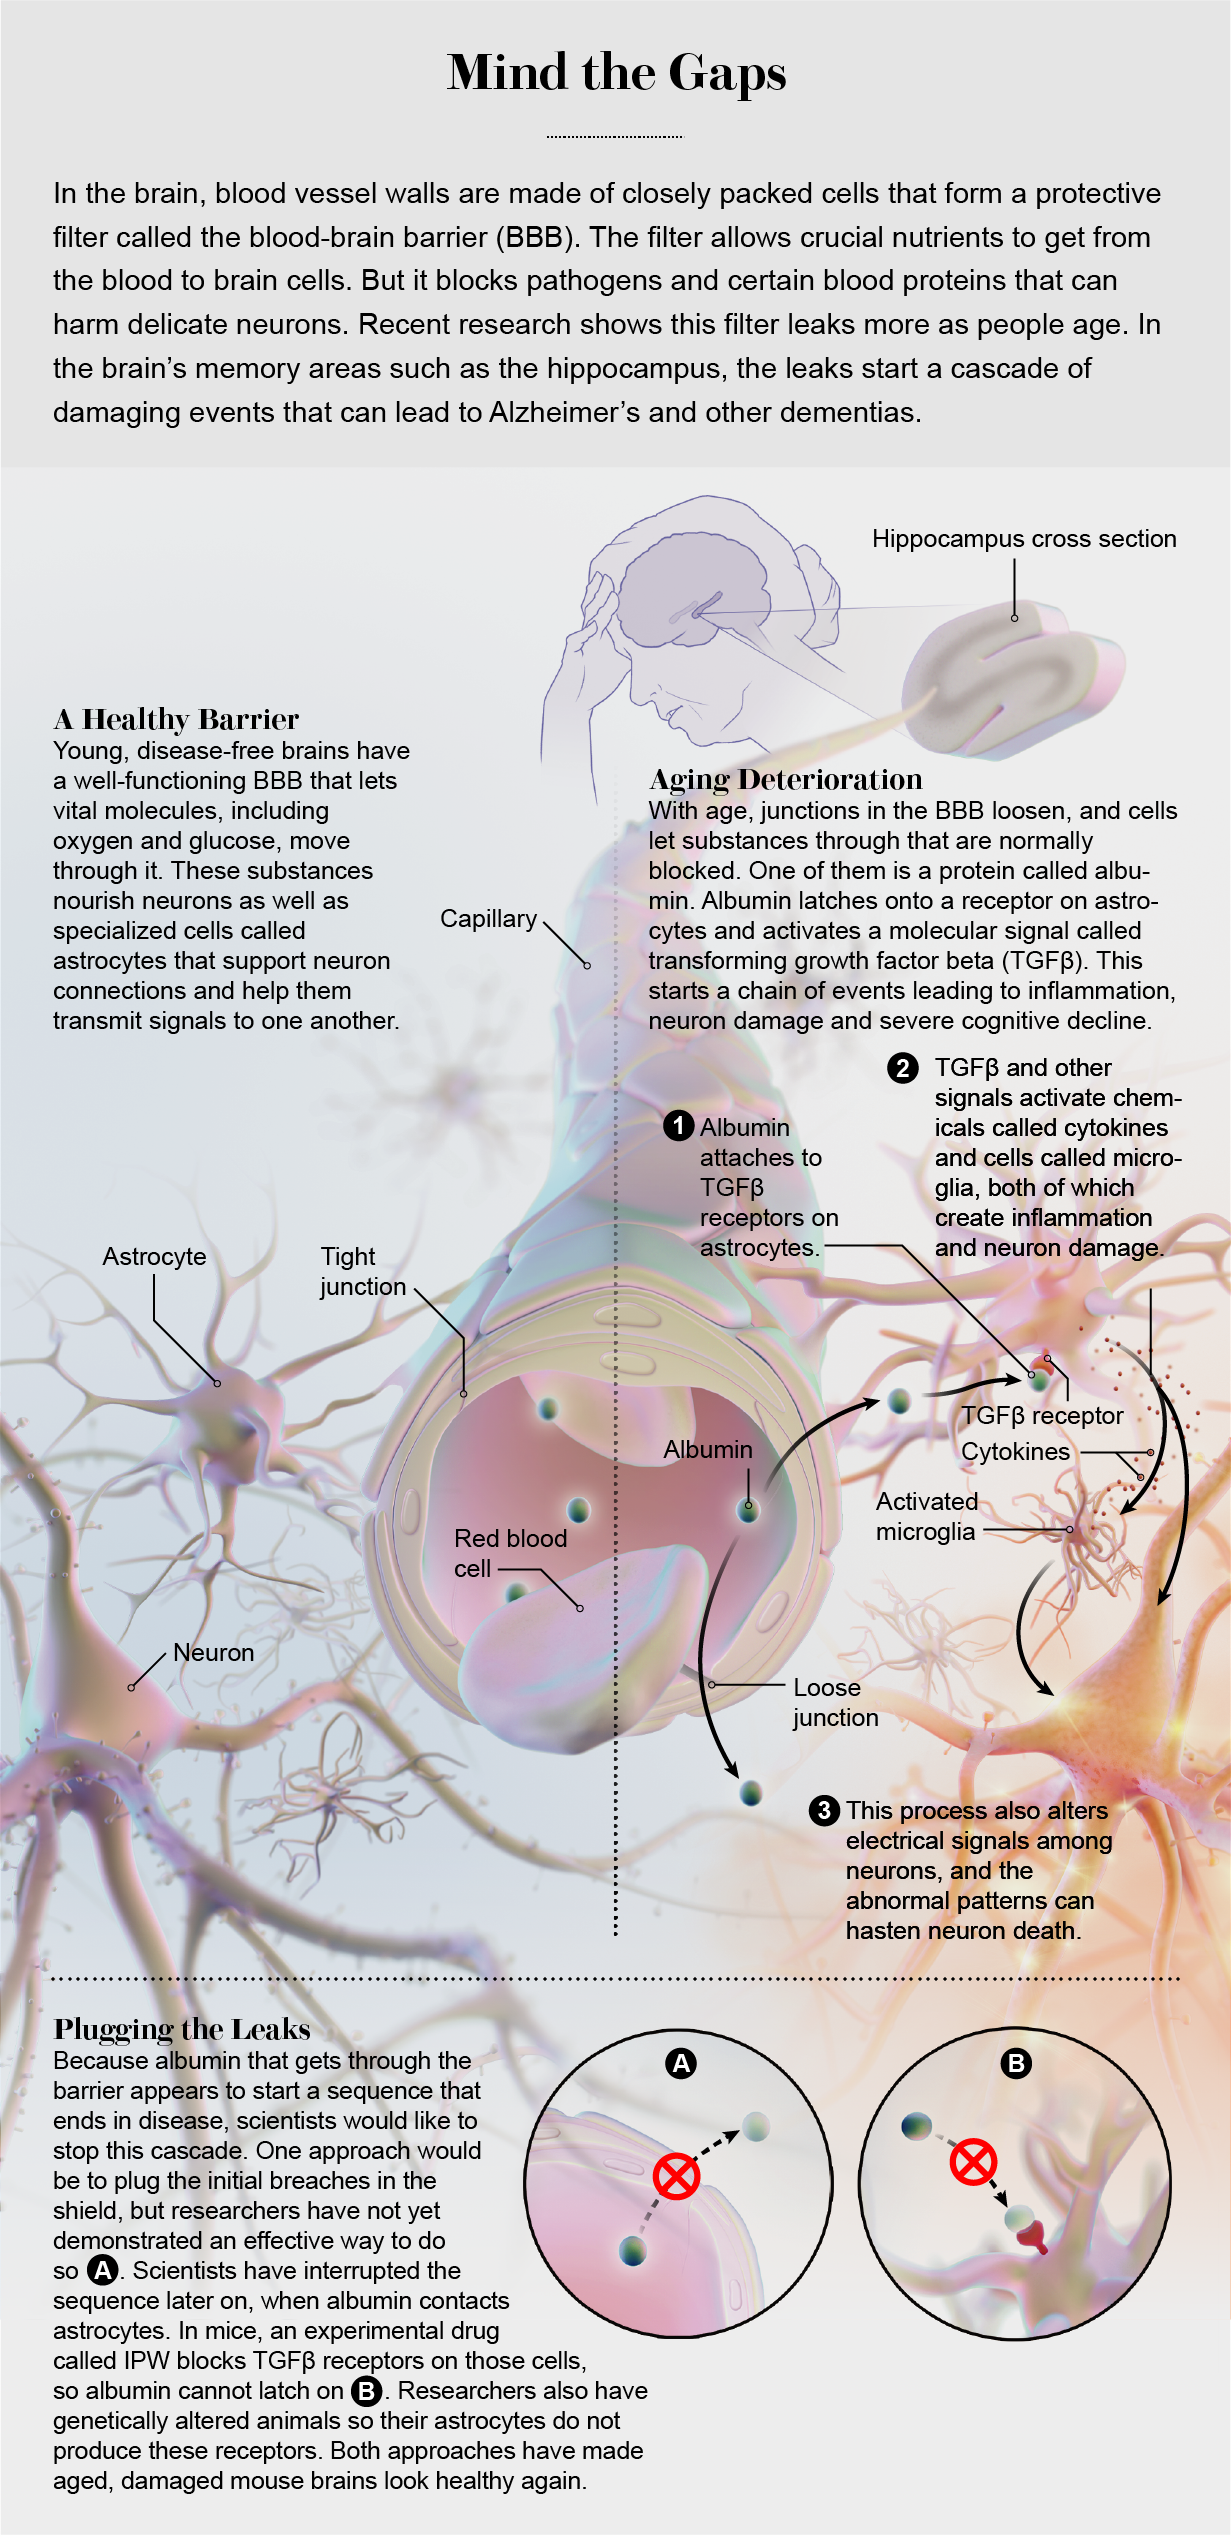 Graphic shows what happens in an aging brain when albumin crosses the blood-brain barrier and attaches to an astrocyte.